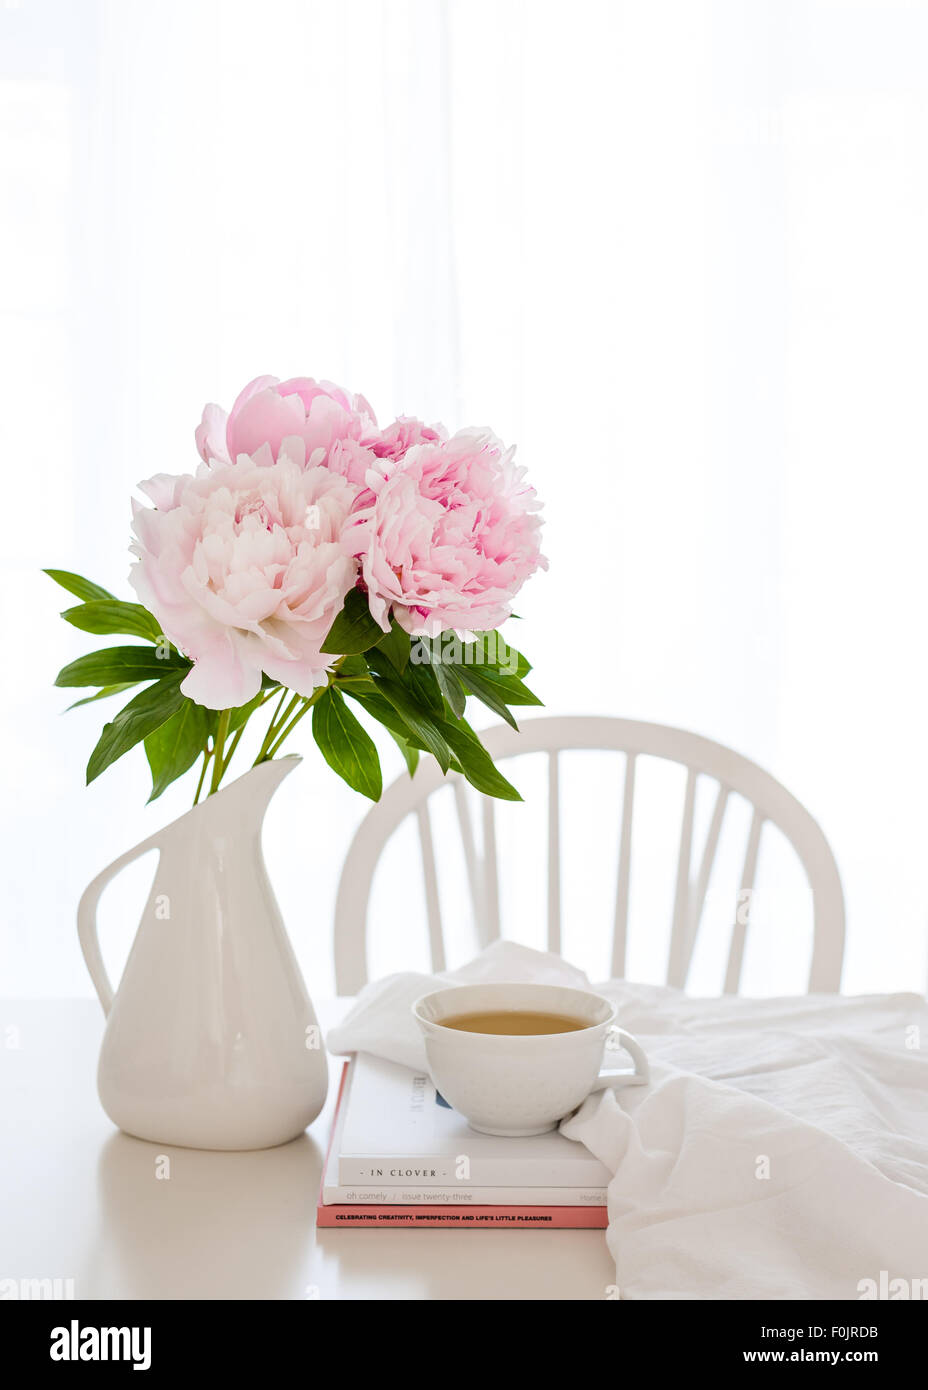 a bunch of pink peonies in a white jug on the table, with magazines, cup of tea, fabric and chair in the background Stock Photo